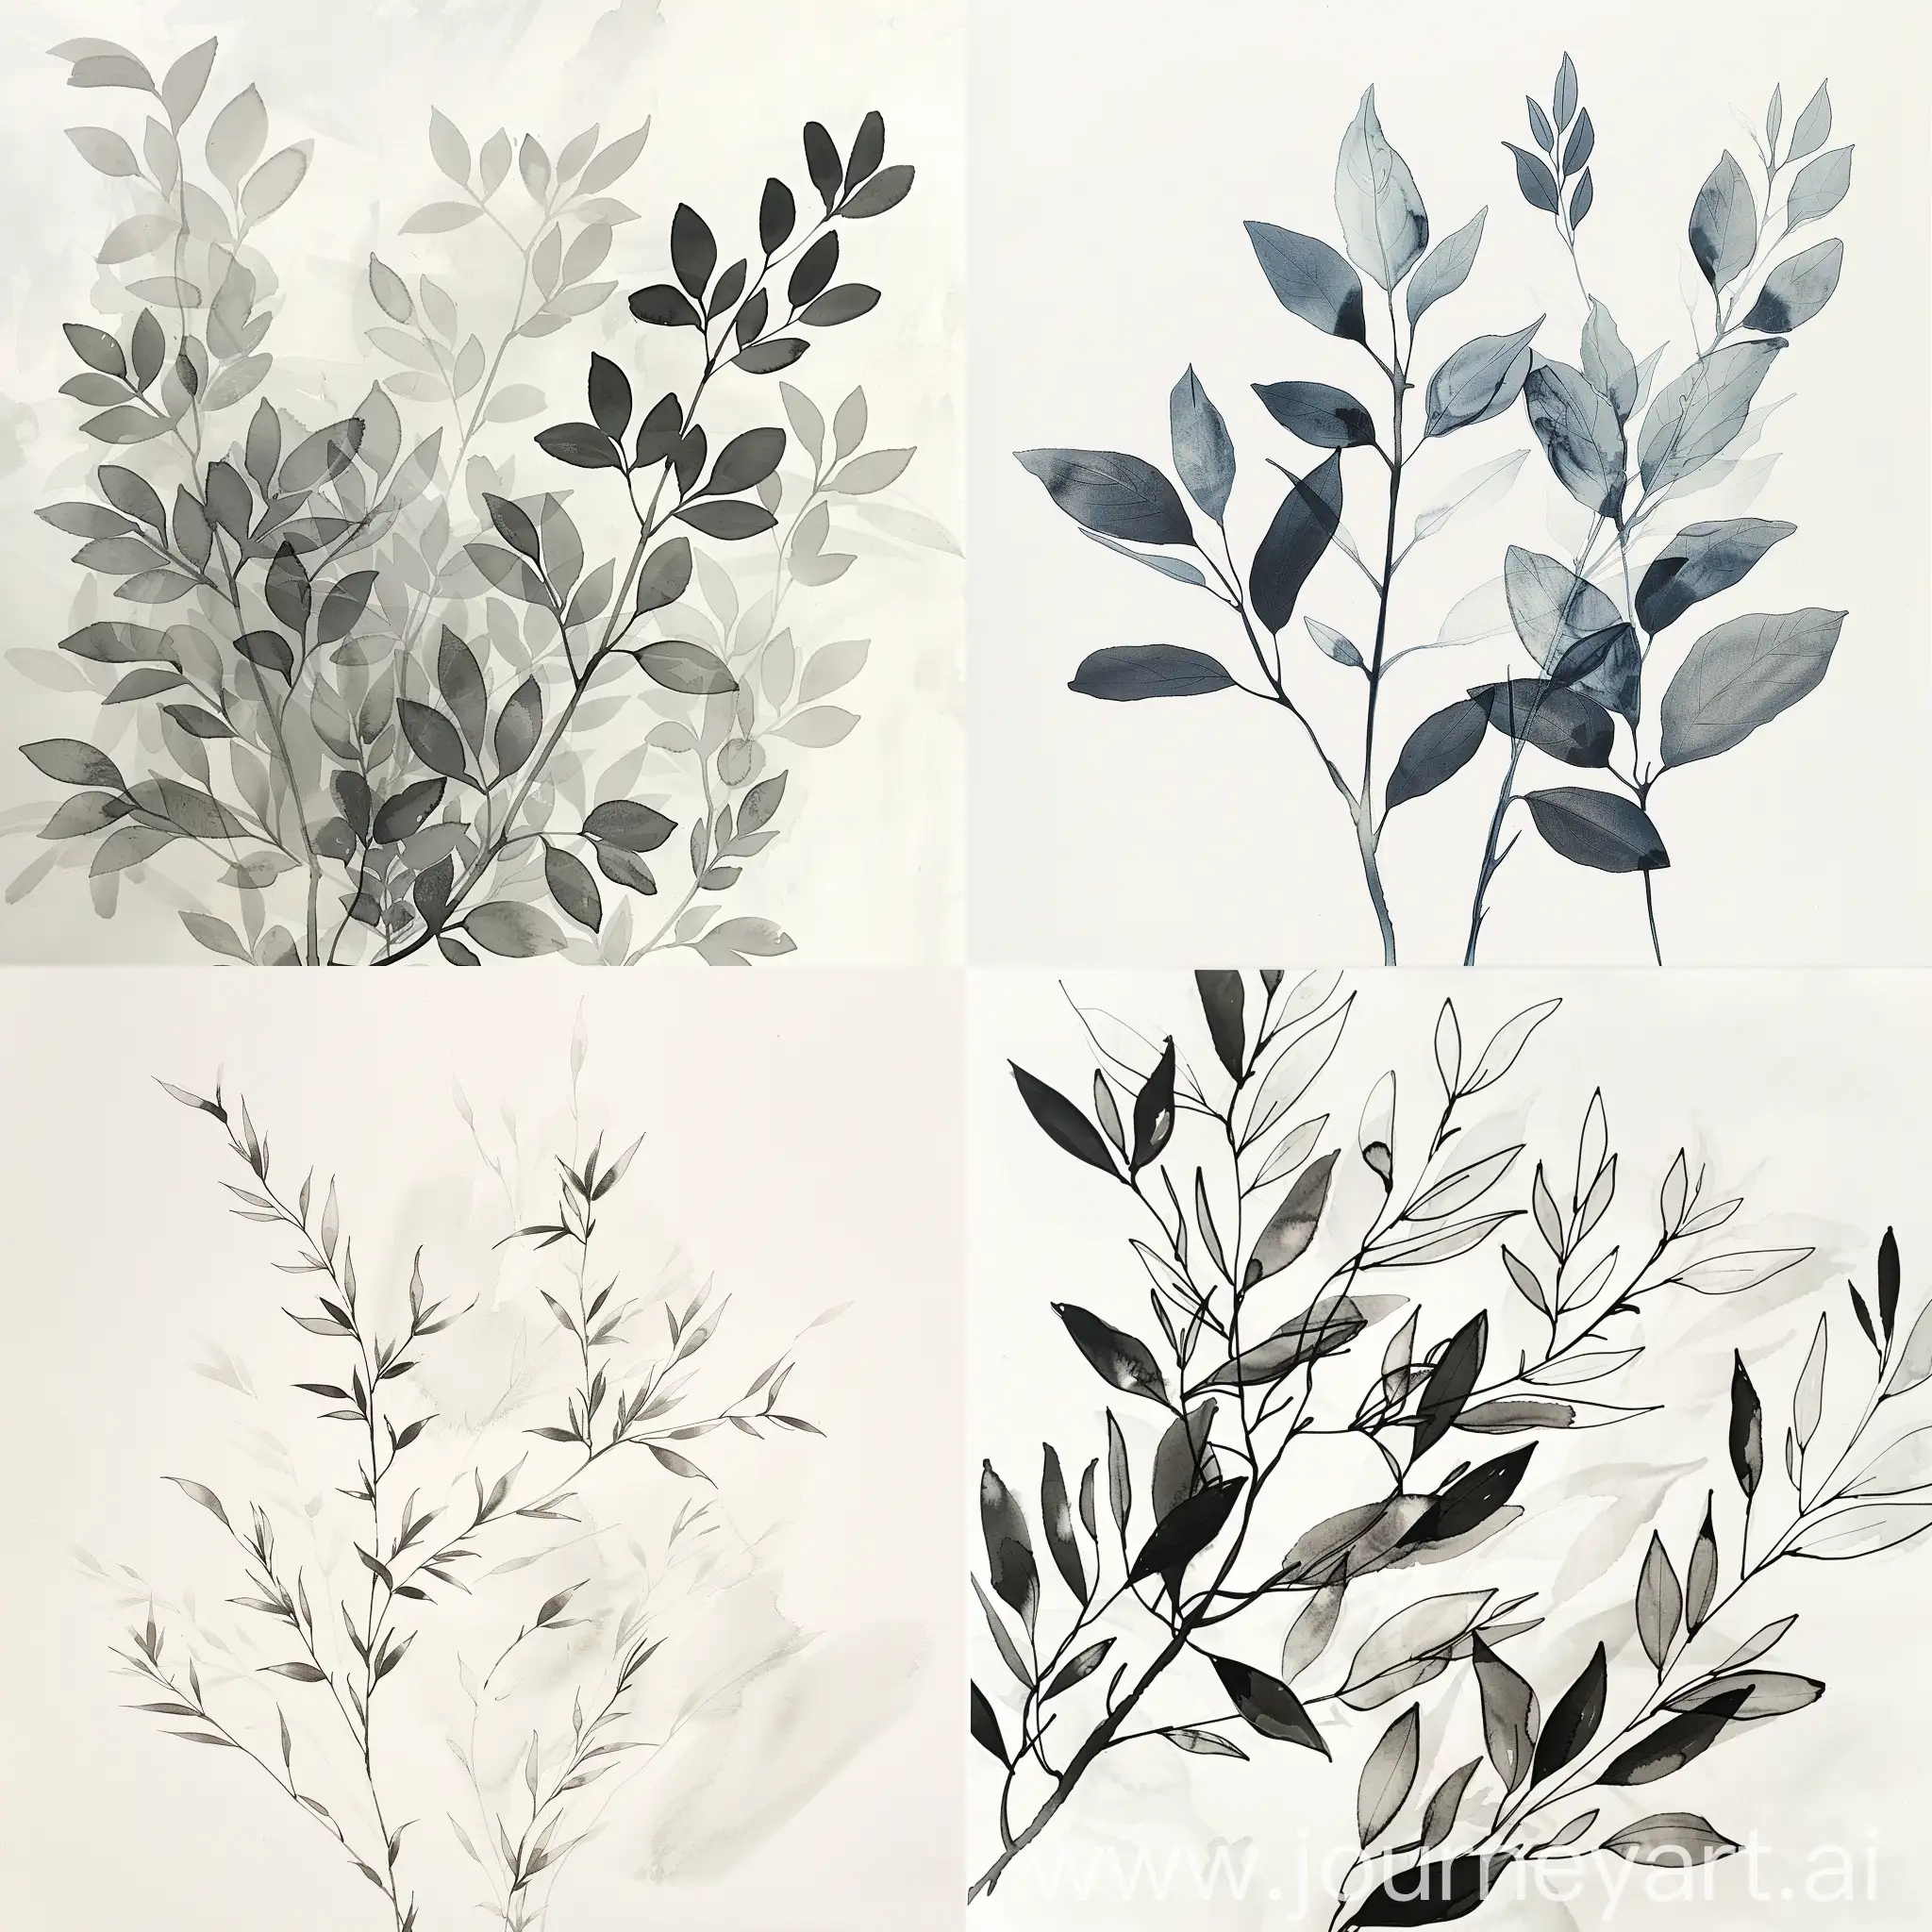 Botanical-Ink-Drawings-Capturing-the-Grace-and-Precision-of-Plant-Life